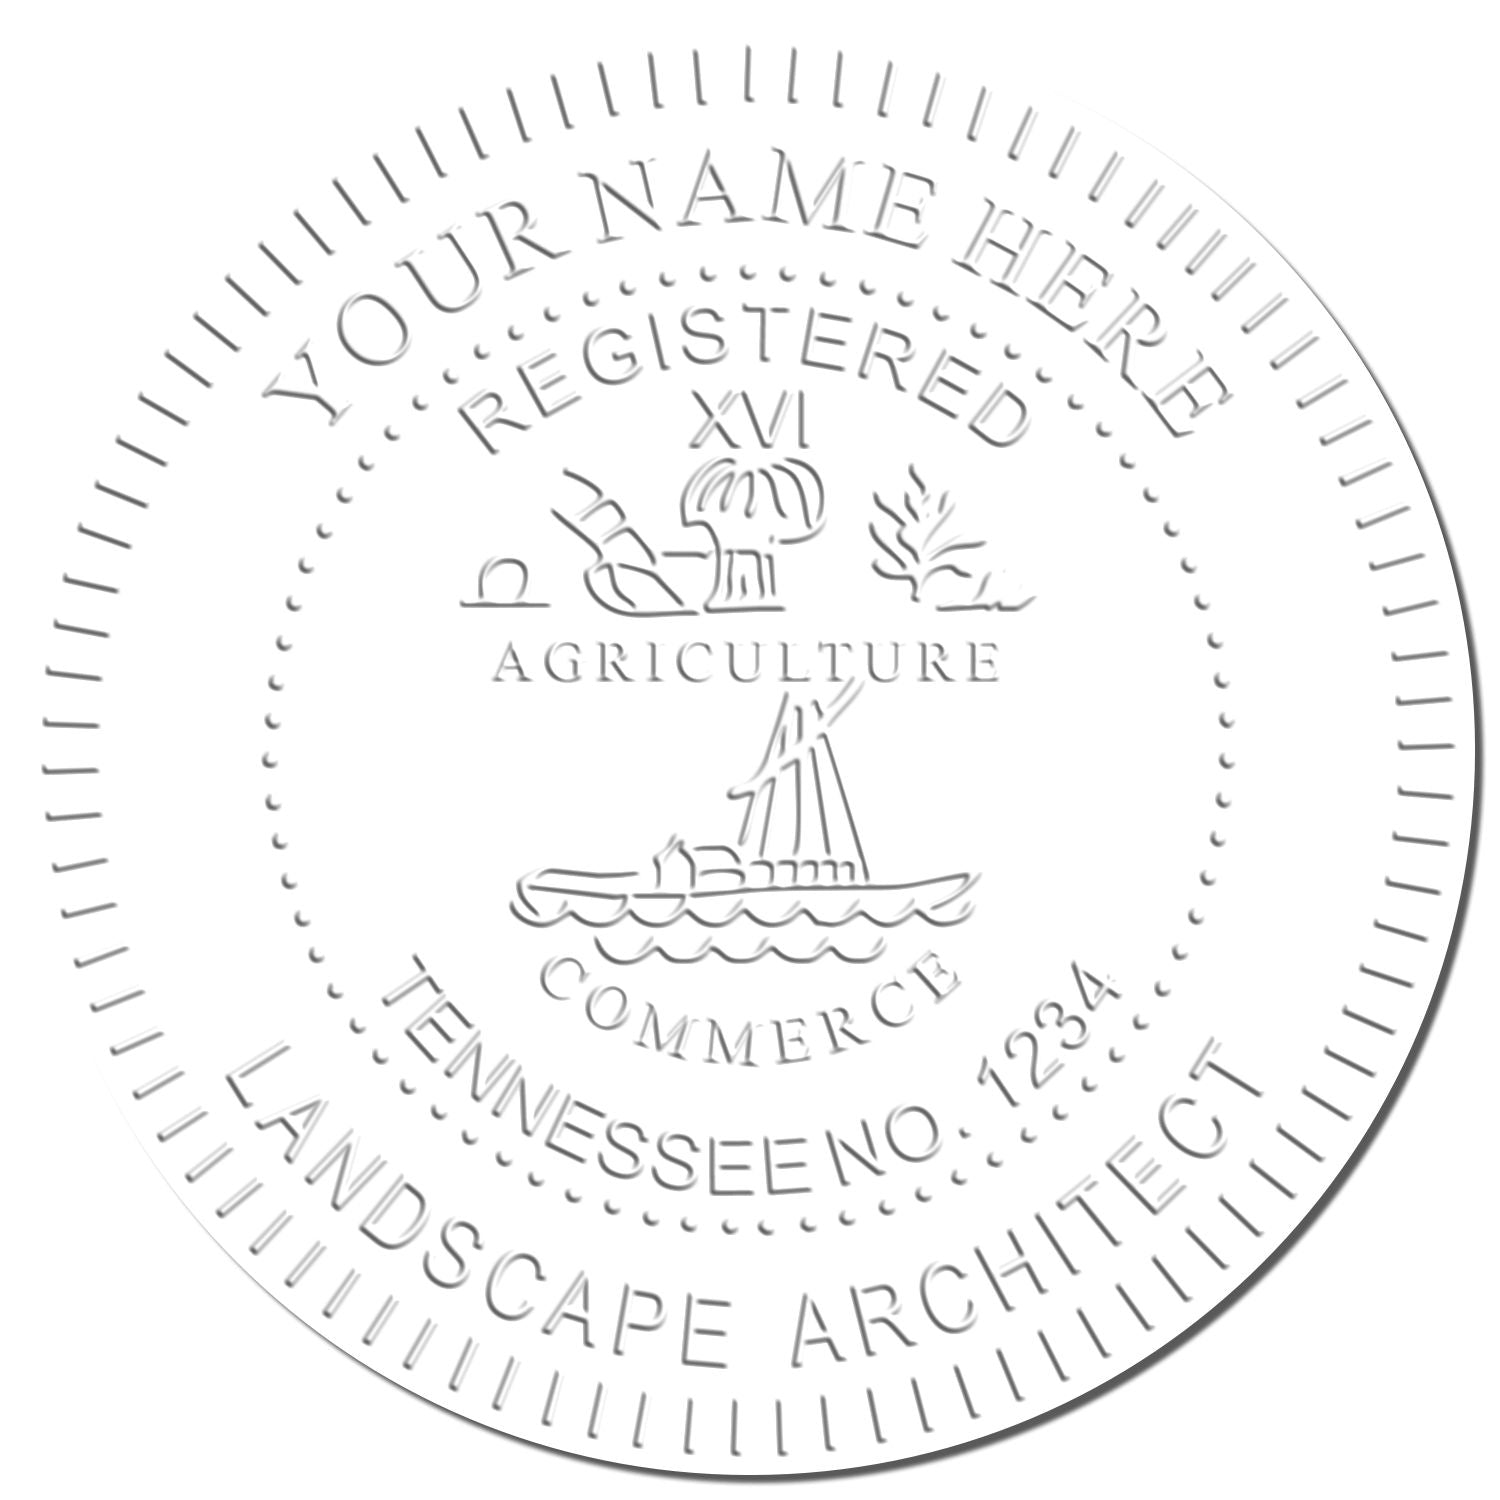 This paper is stamped with a sample imprint of the Tennessee Desk Landscape Architectural Seal Embosser, signifying its quality and reliability.